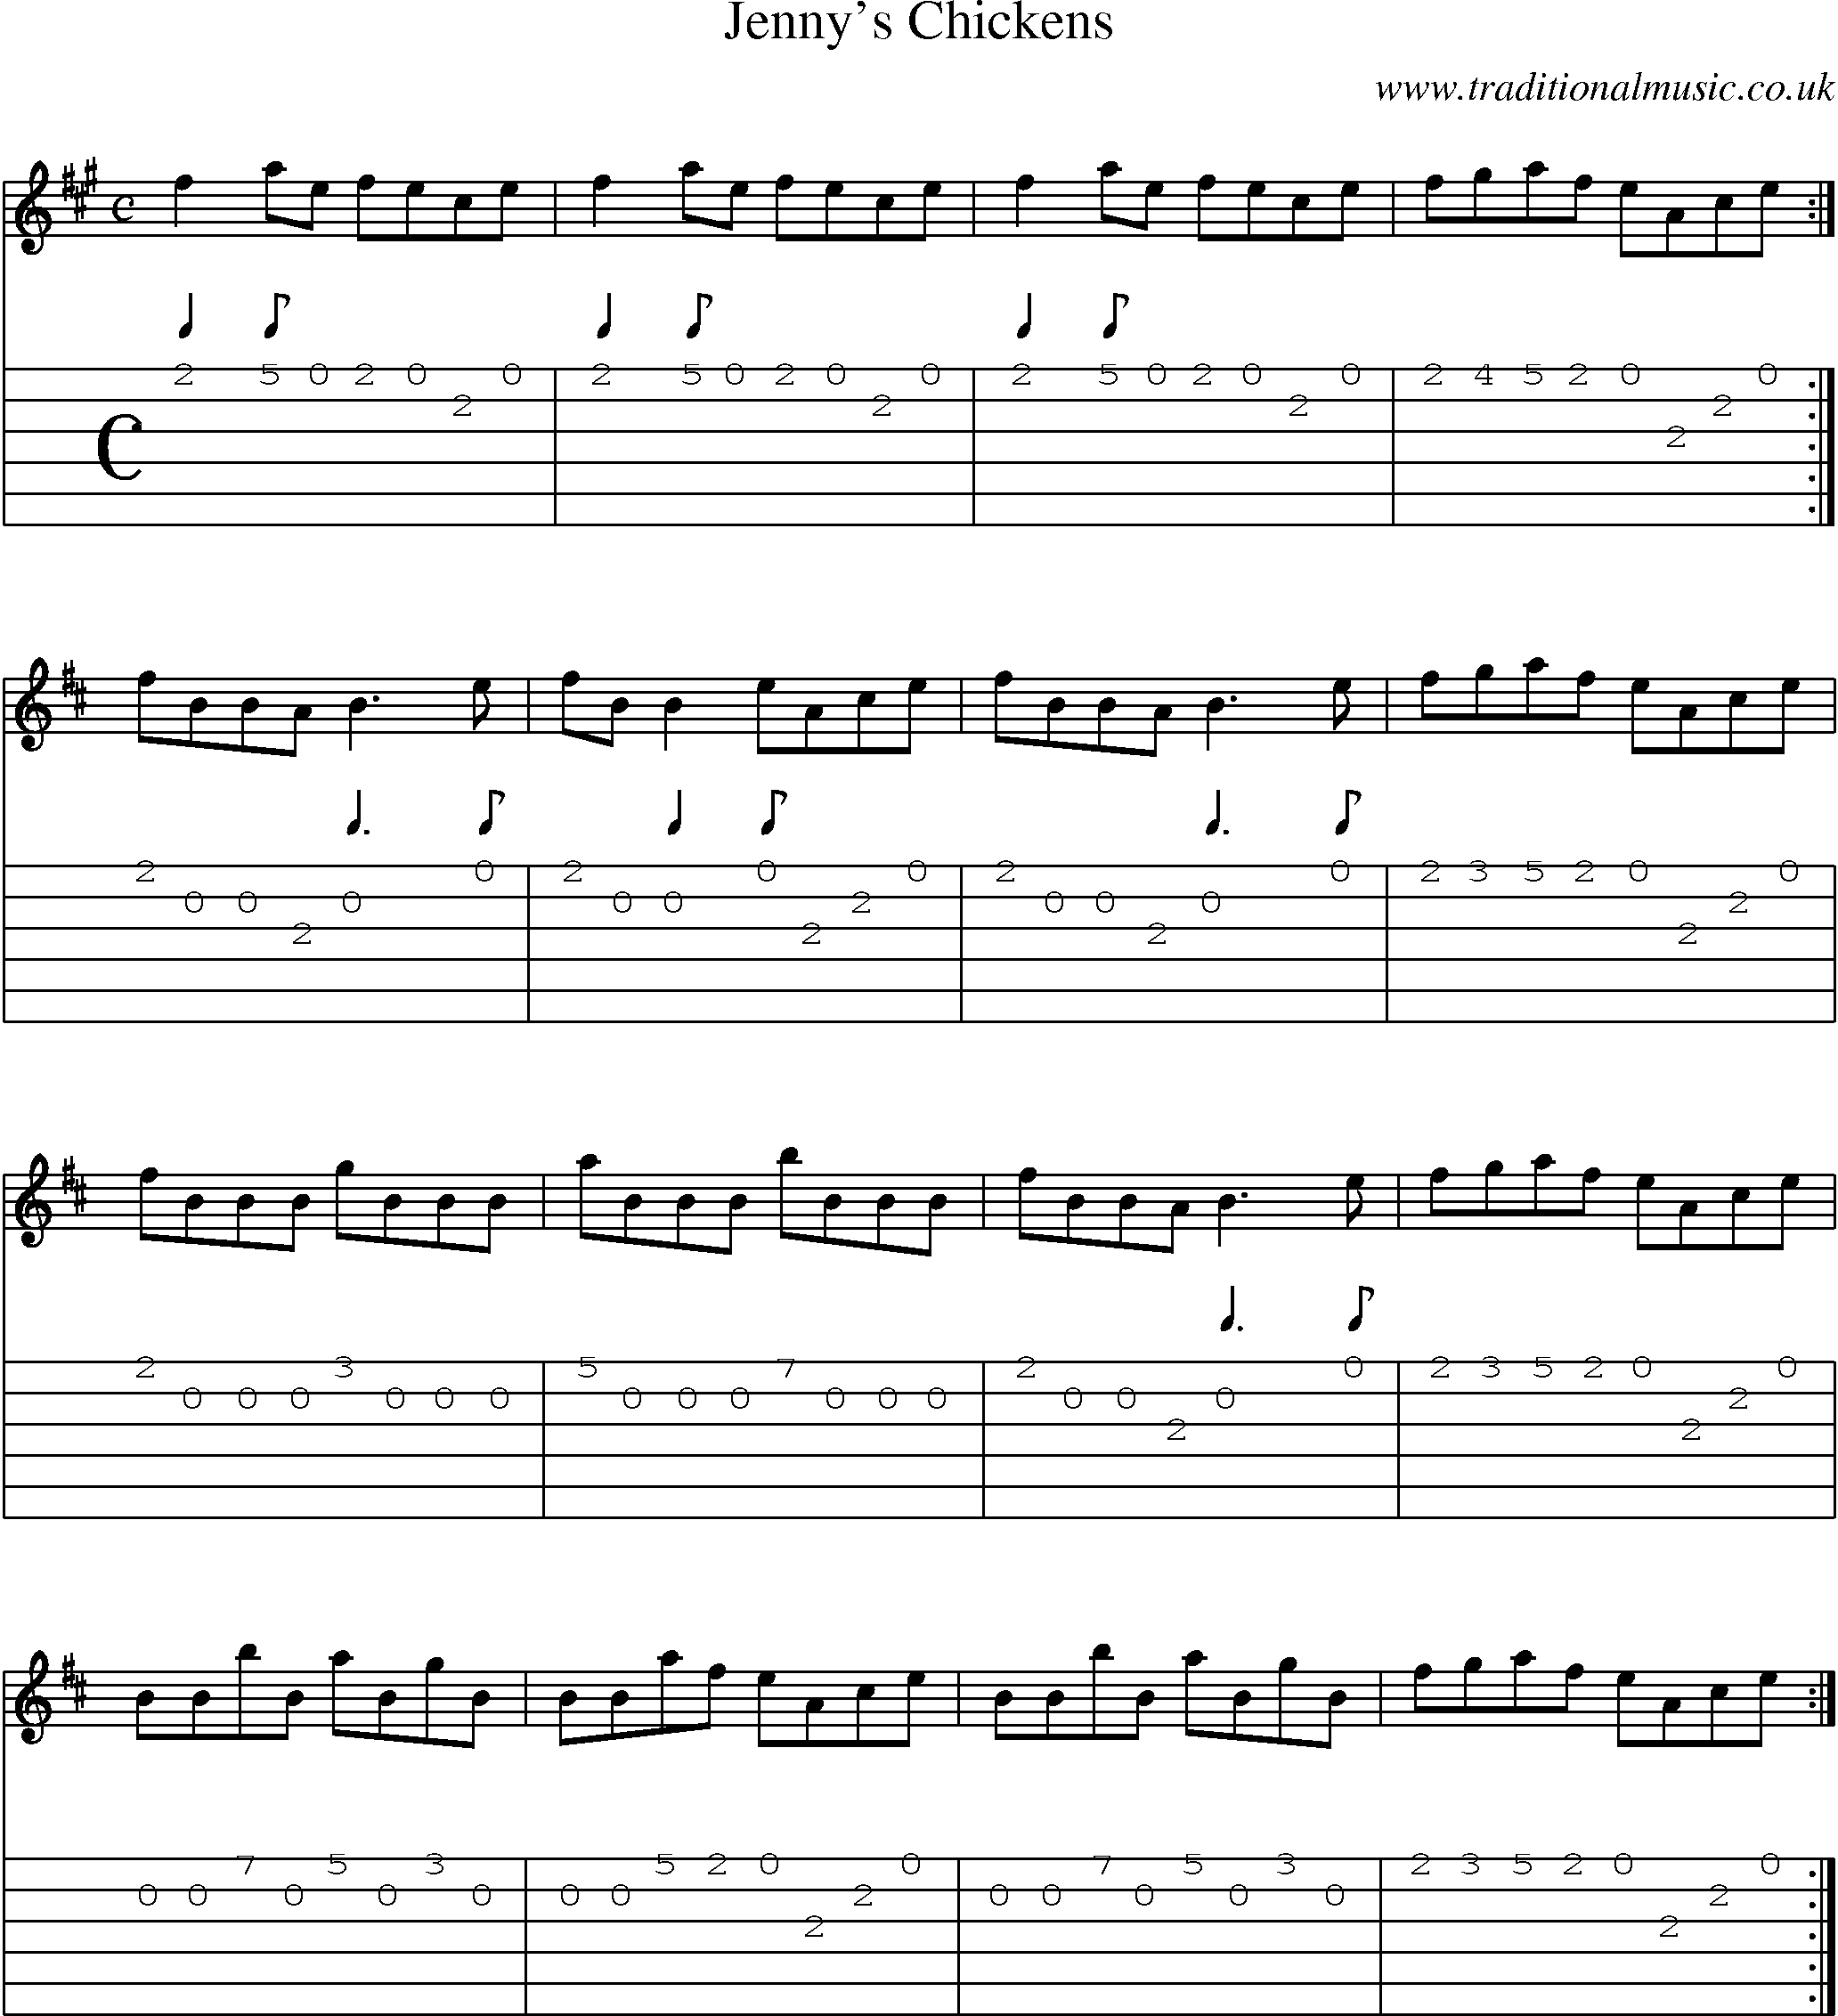 Music Score and Guitar Tabs for Jennys Chickens